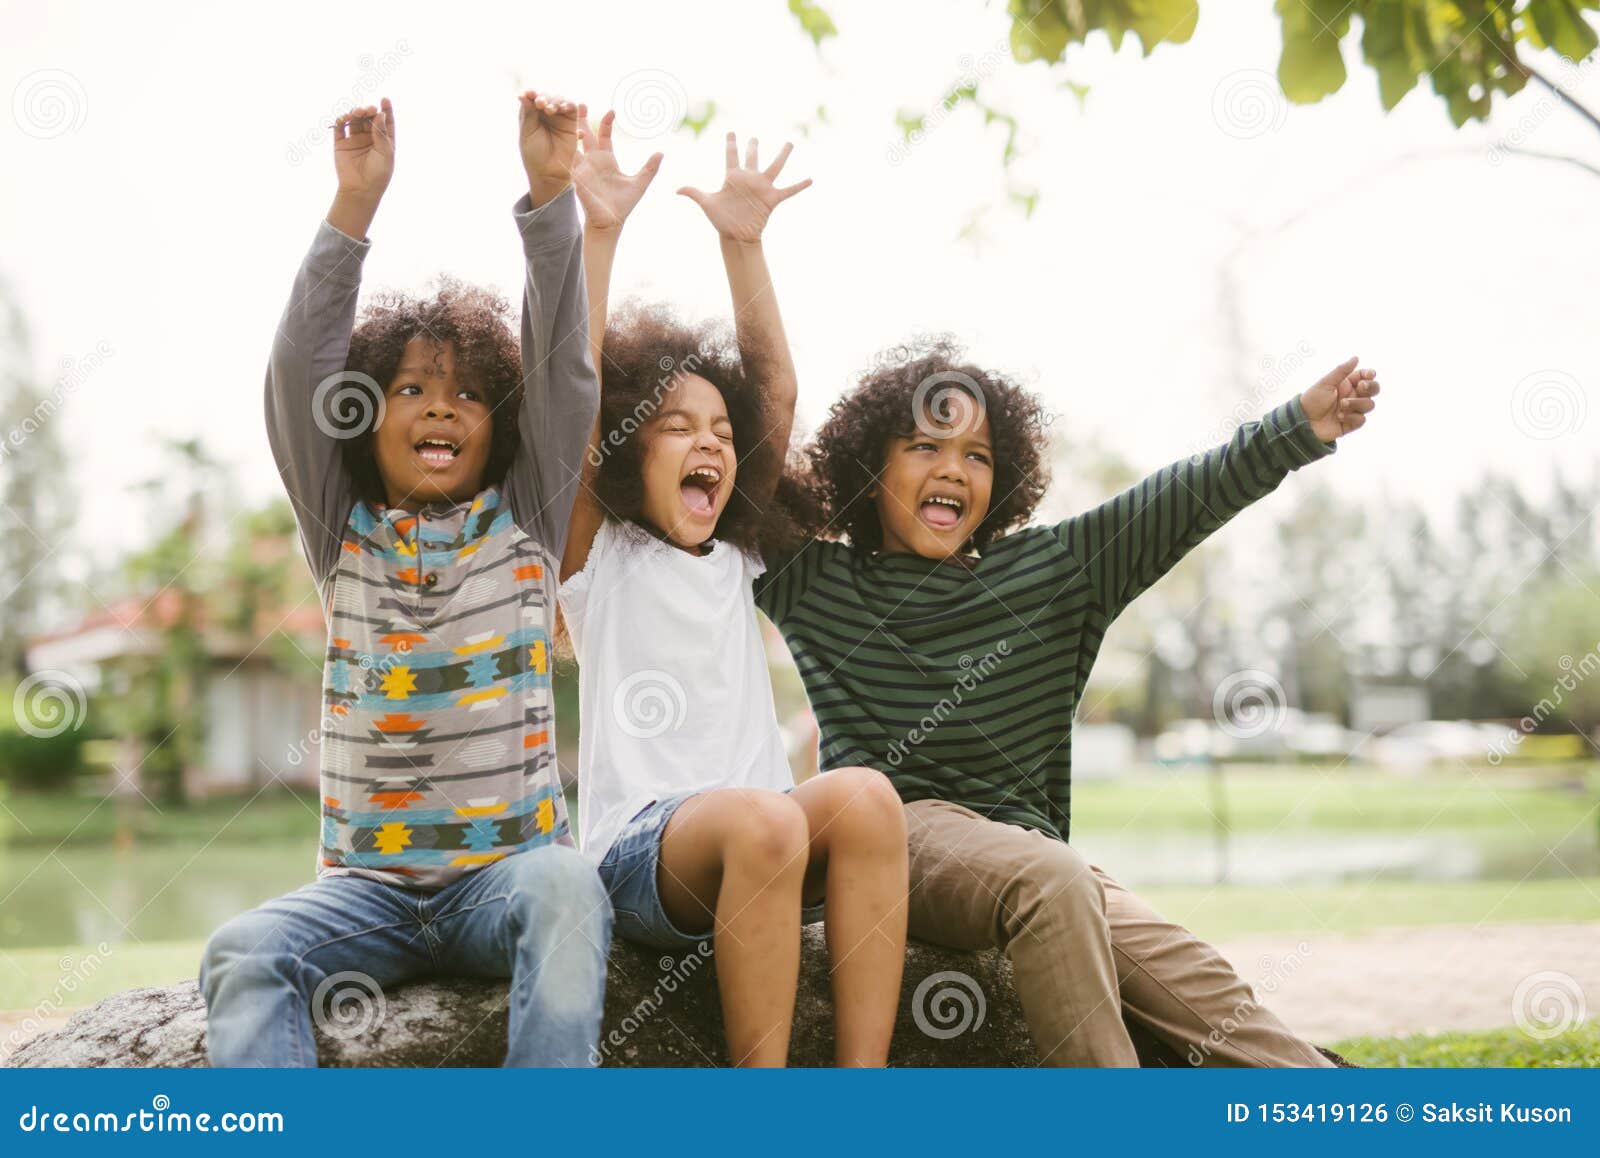 happy african american little boy kids children joyfully cheerful and laughing. concept of happiness.